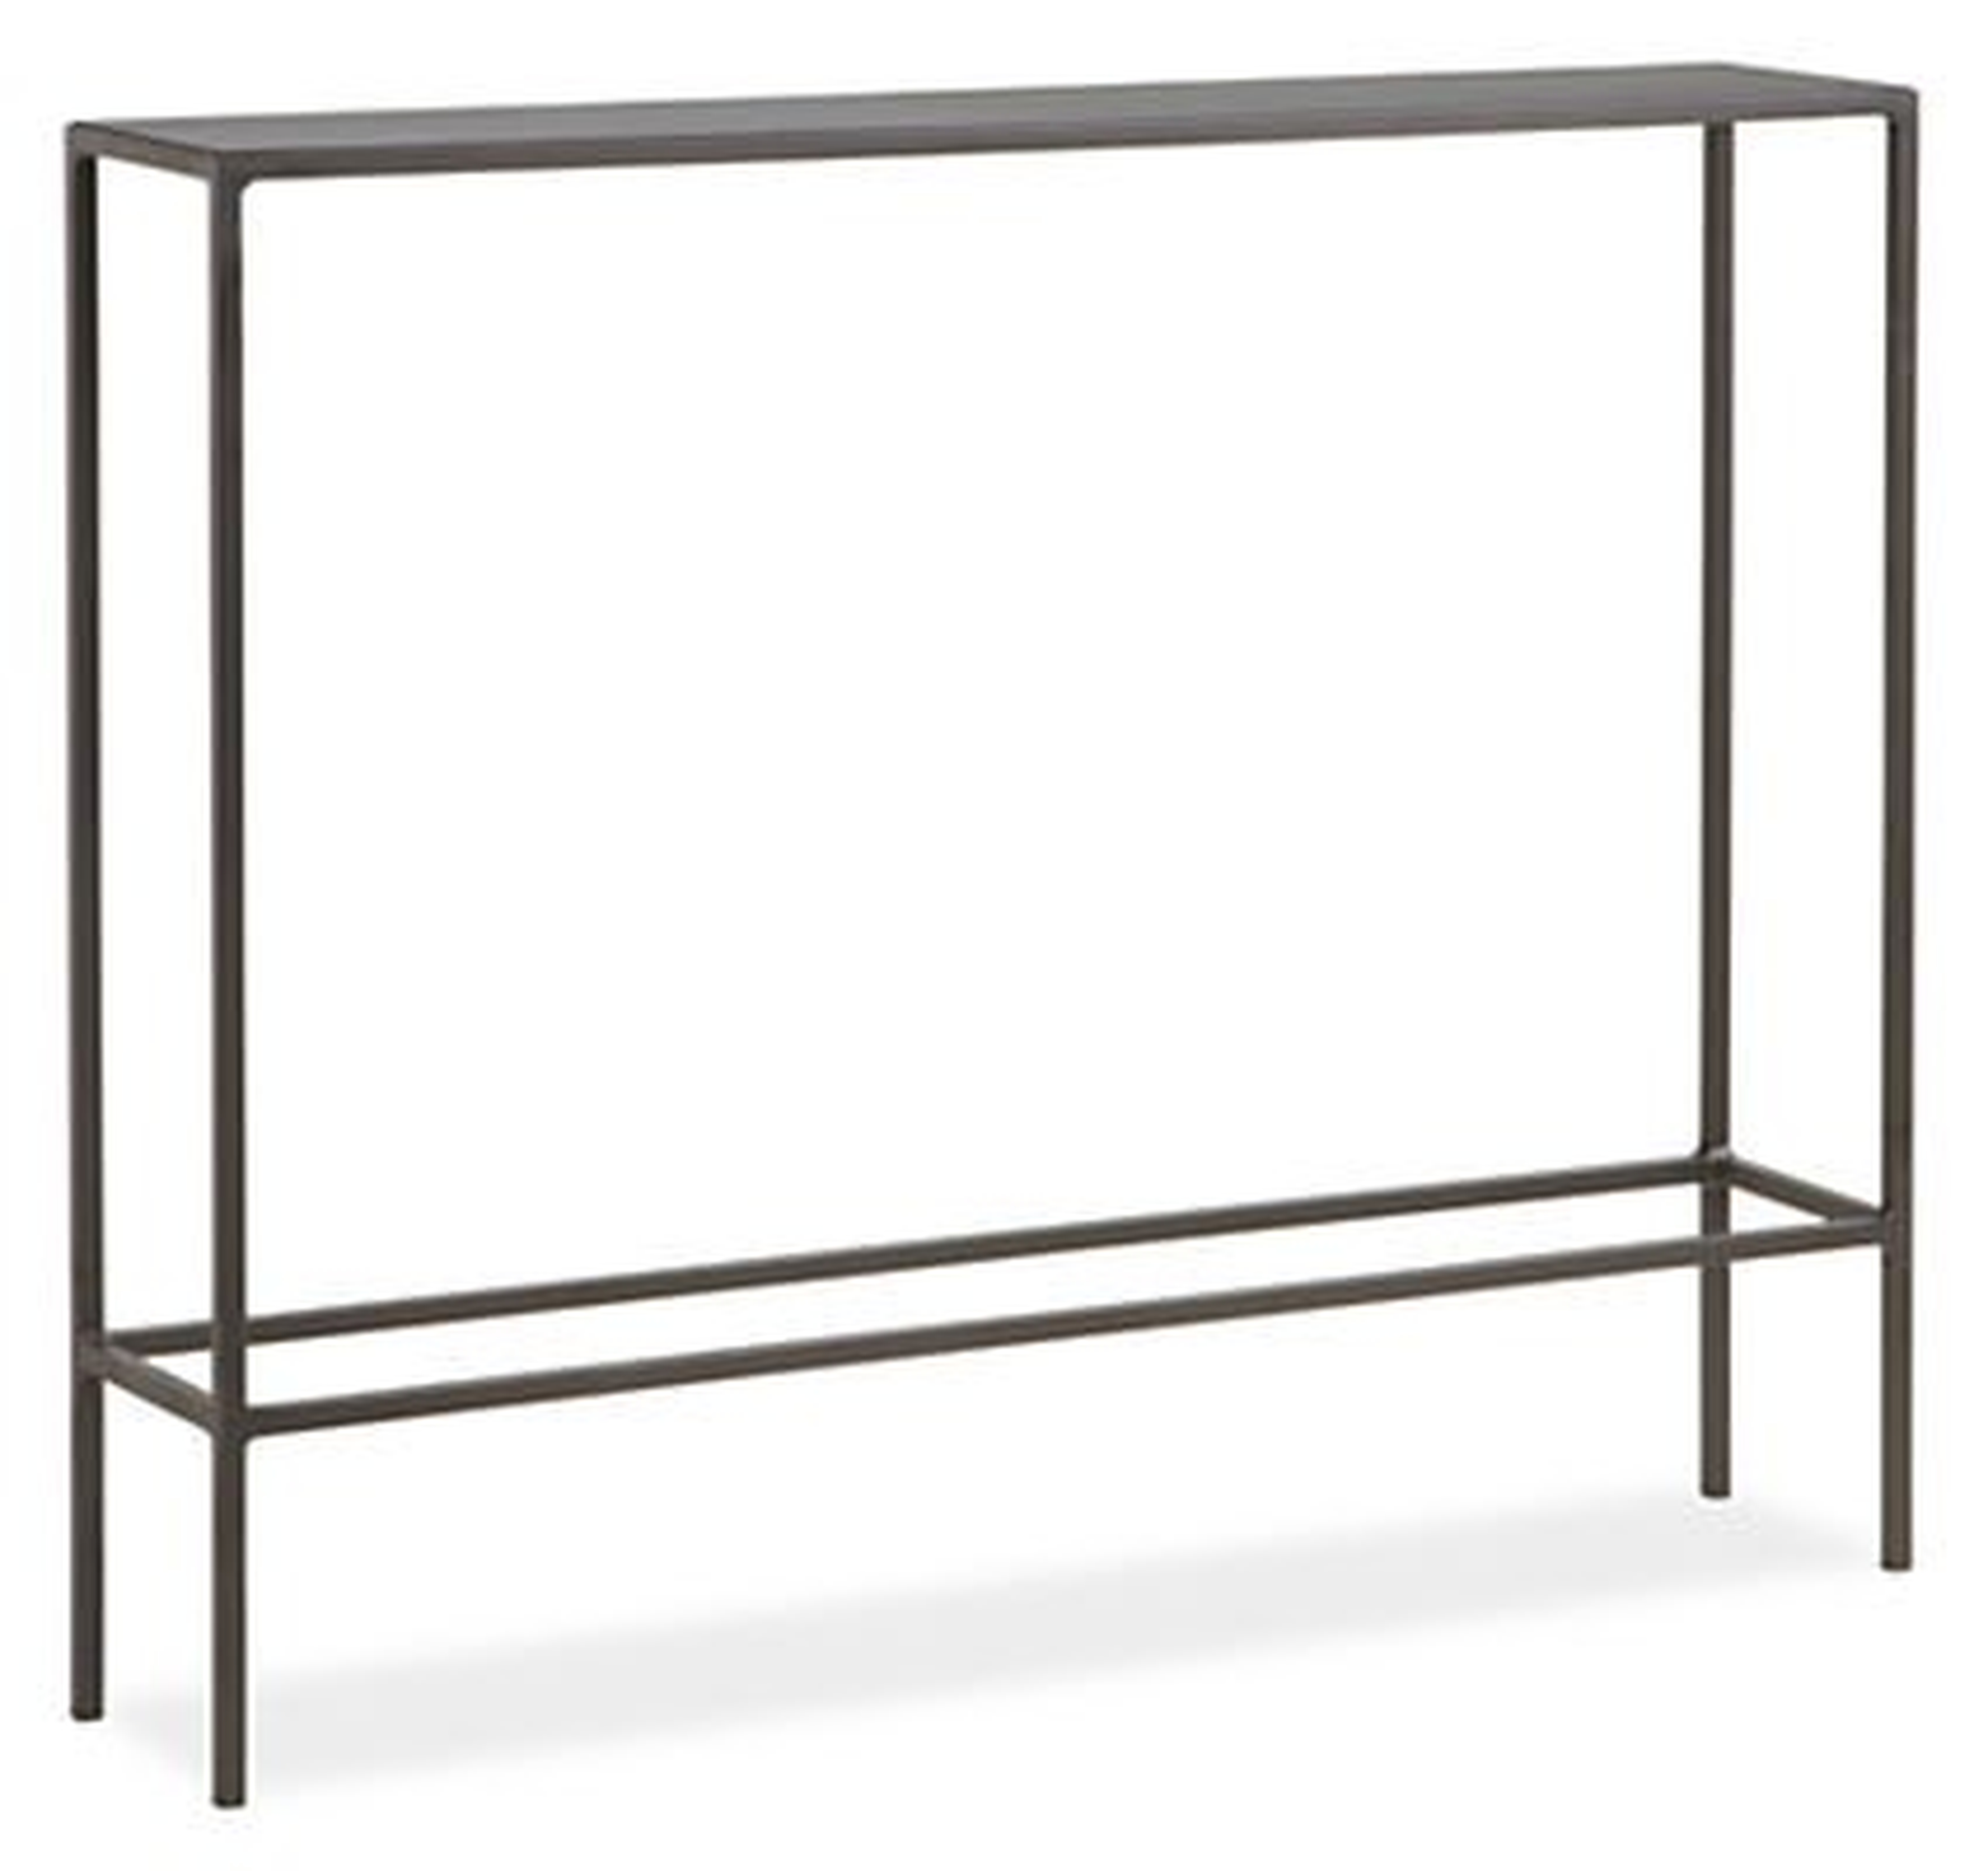 36"W Slim Console Tables in Natural Steel - Room & Board